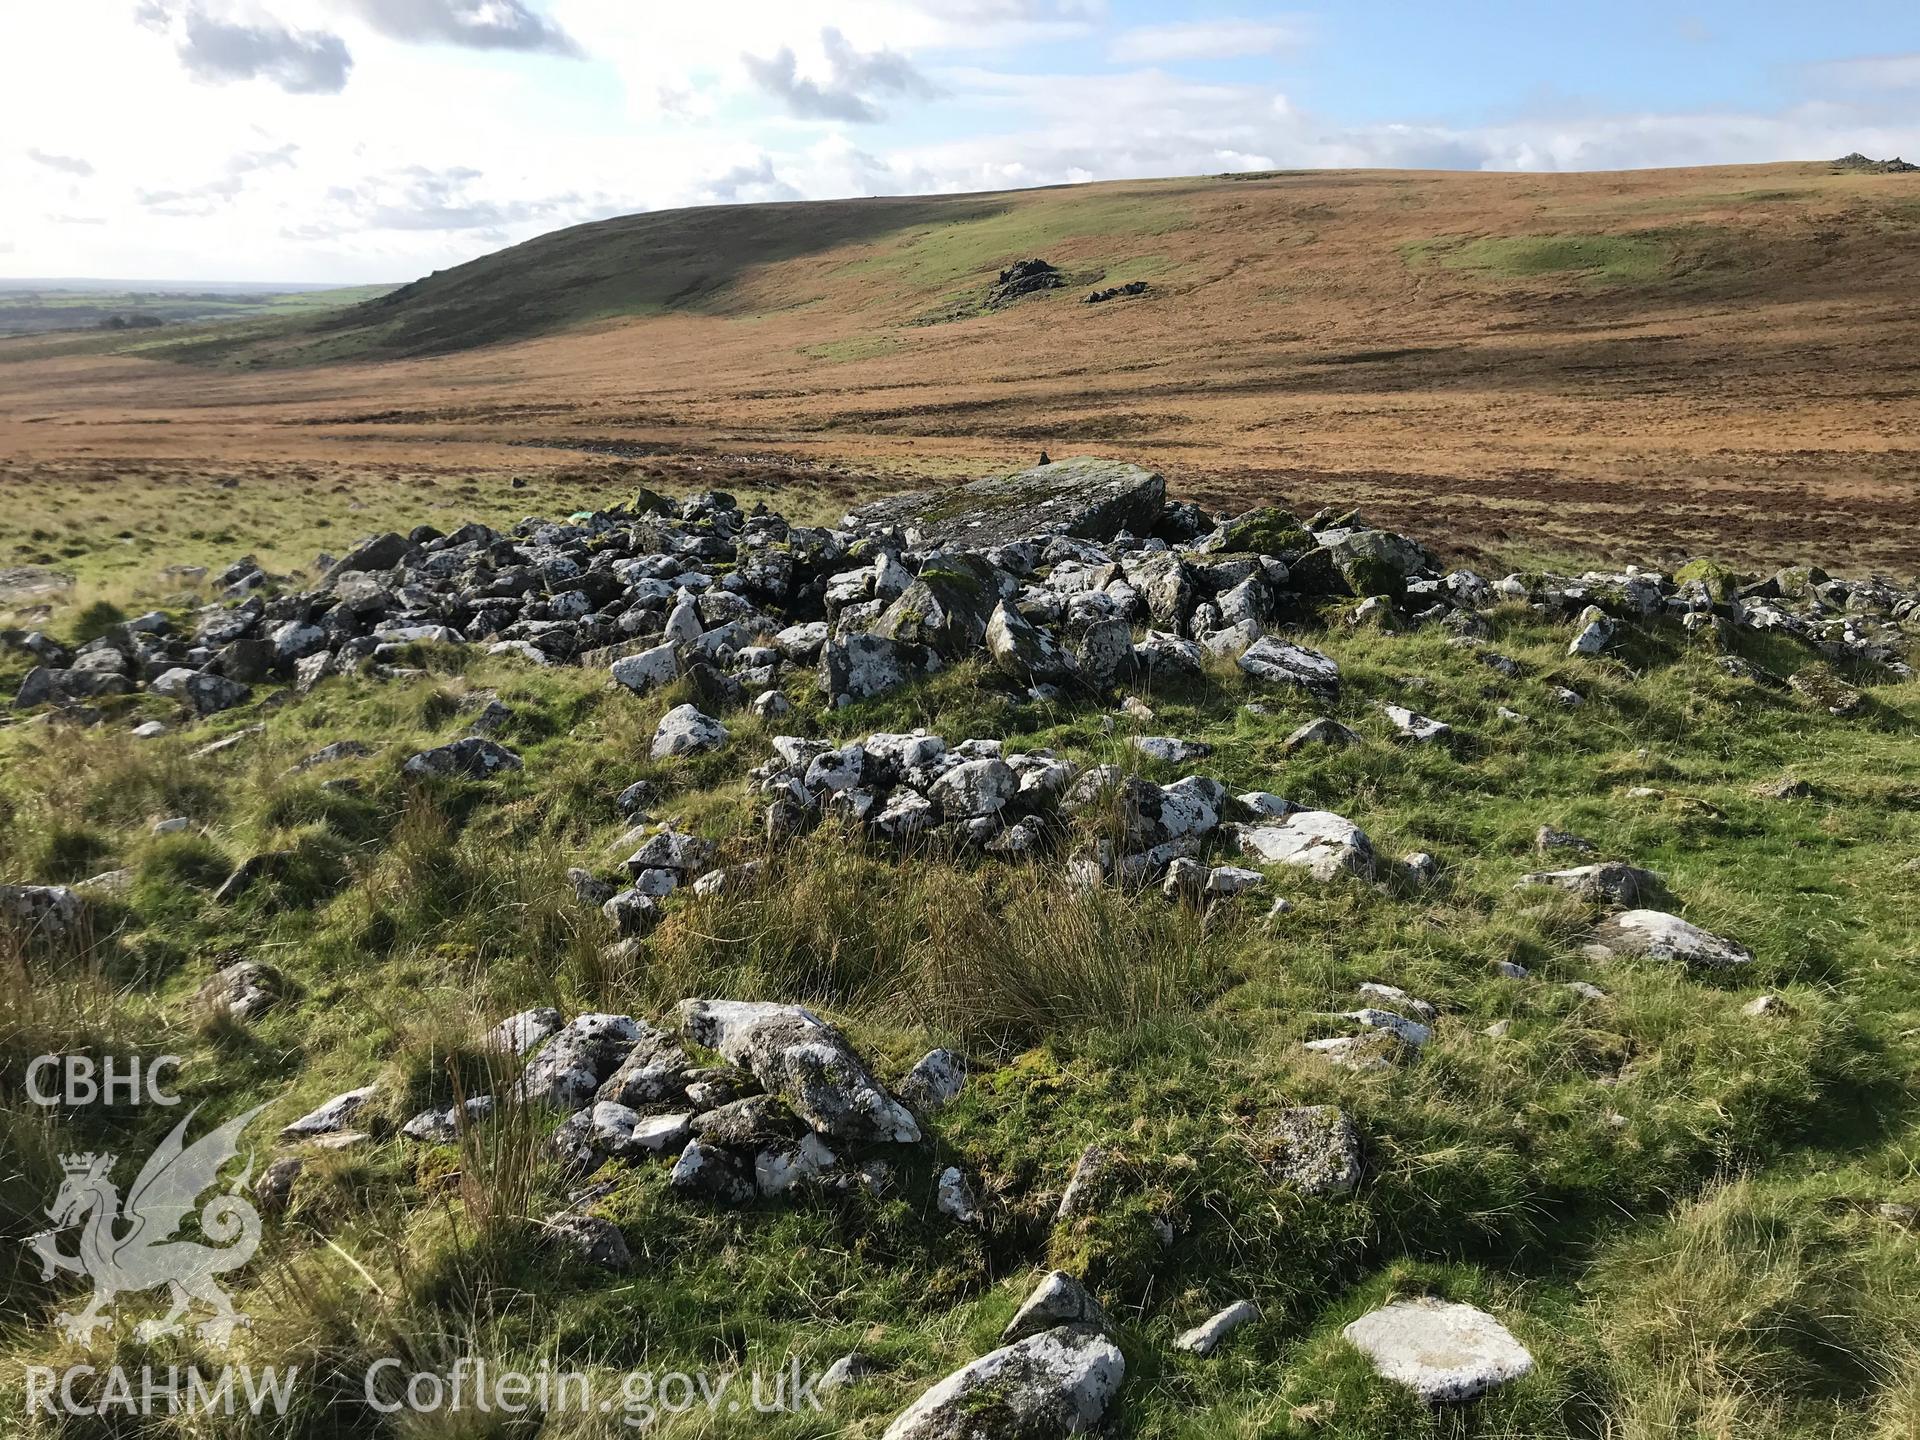 Digital colour photograph showing Carn Menyn Cairn or chambered tomb, Mynachlog Ddu, taken by Paul Davis on 22nd October 2019.